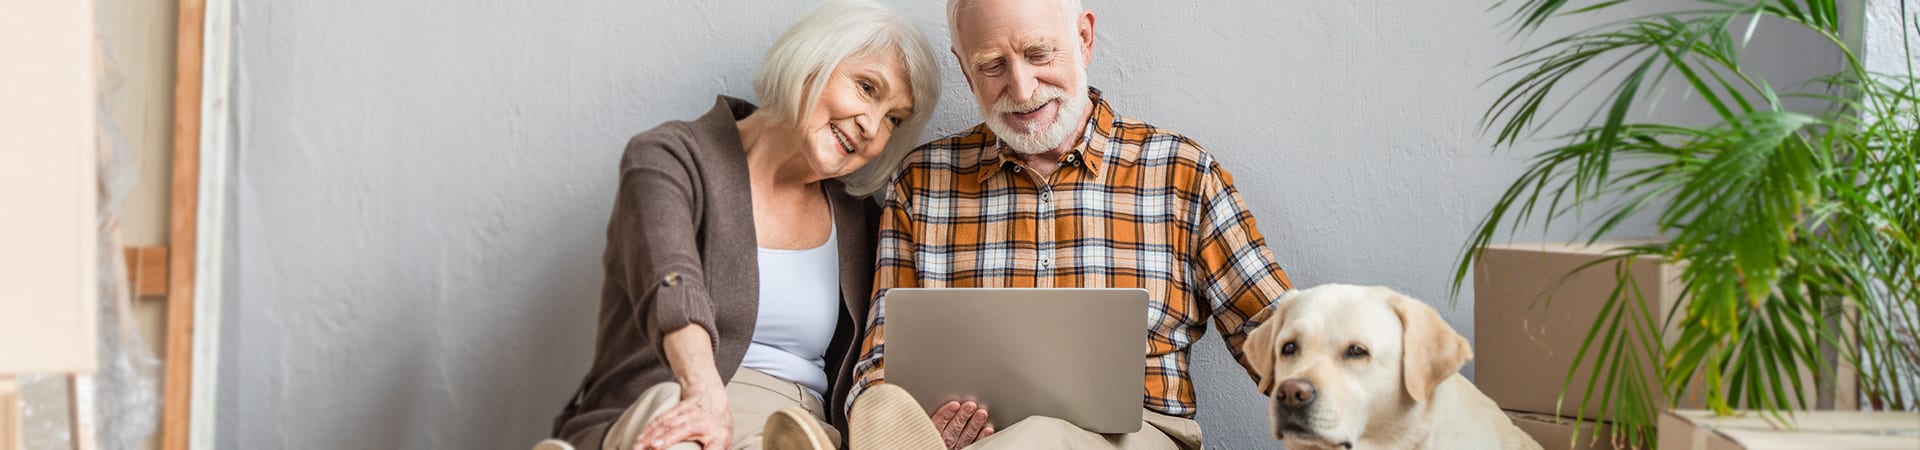 A senior couple researches home care on a tablet while their dog sits nearby